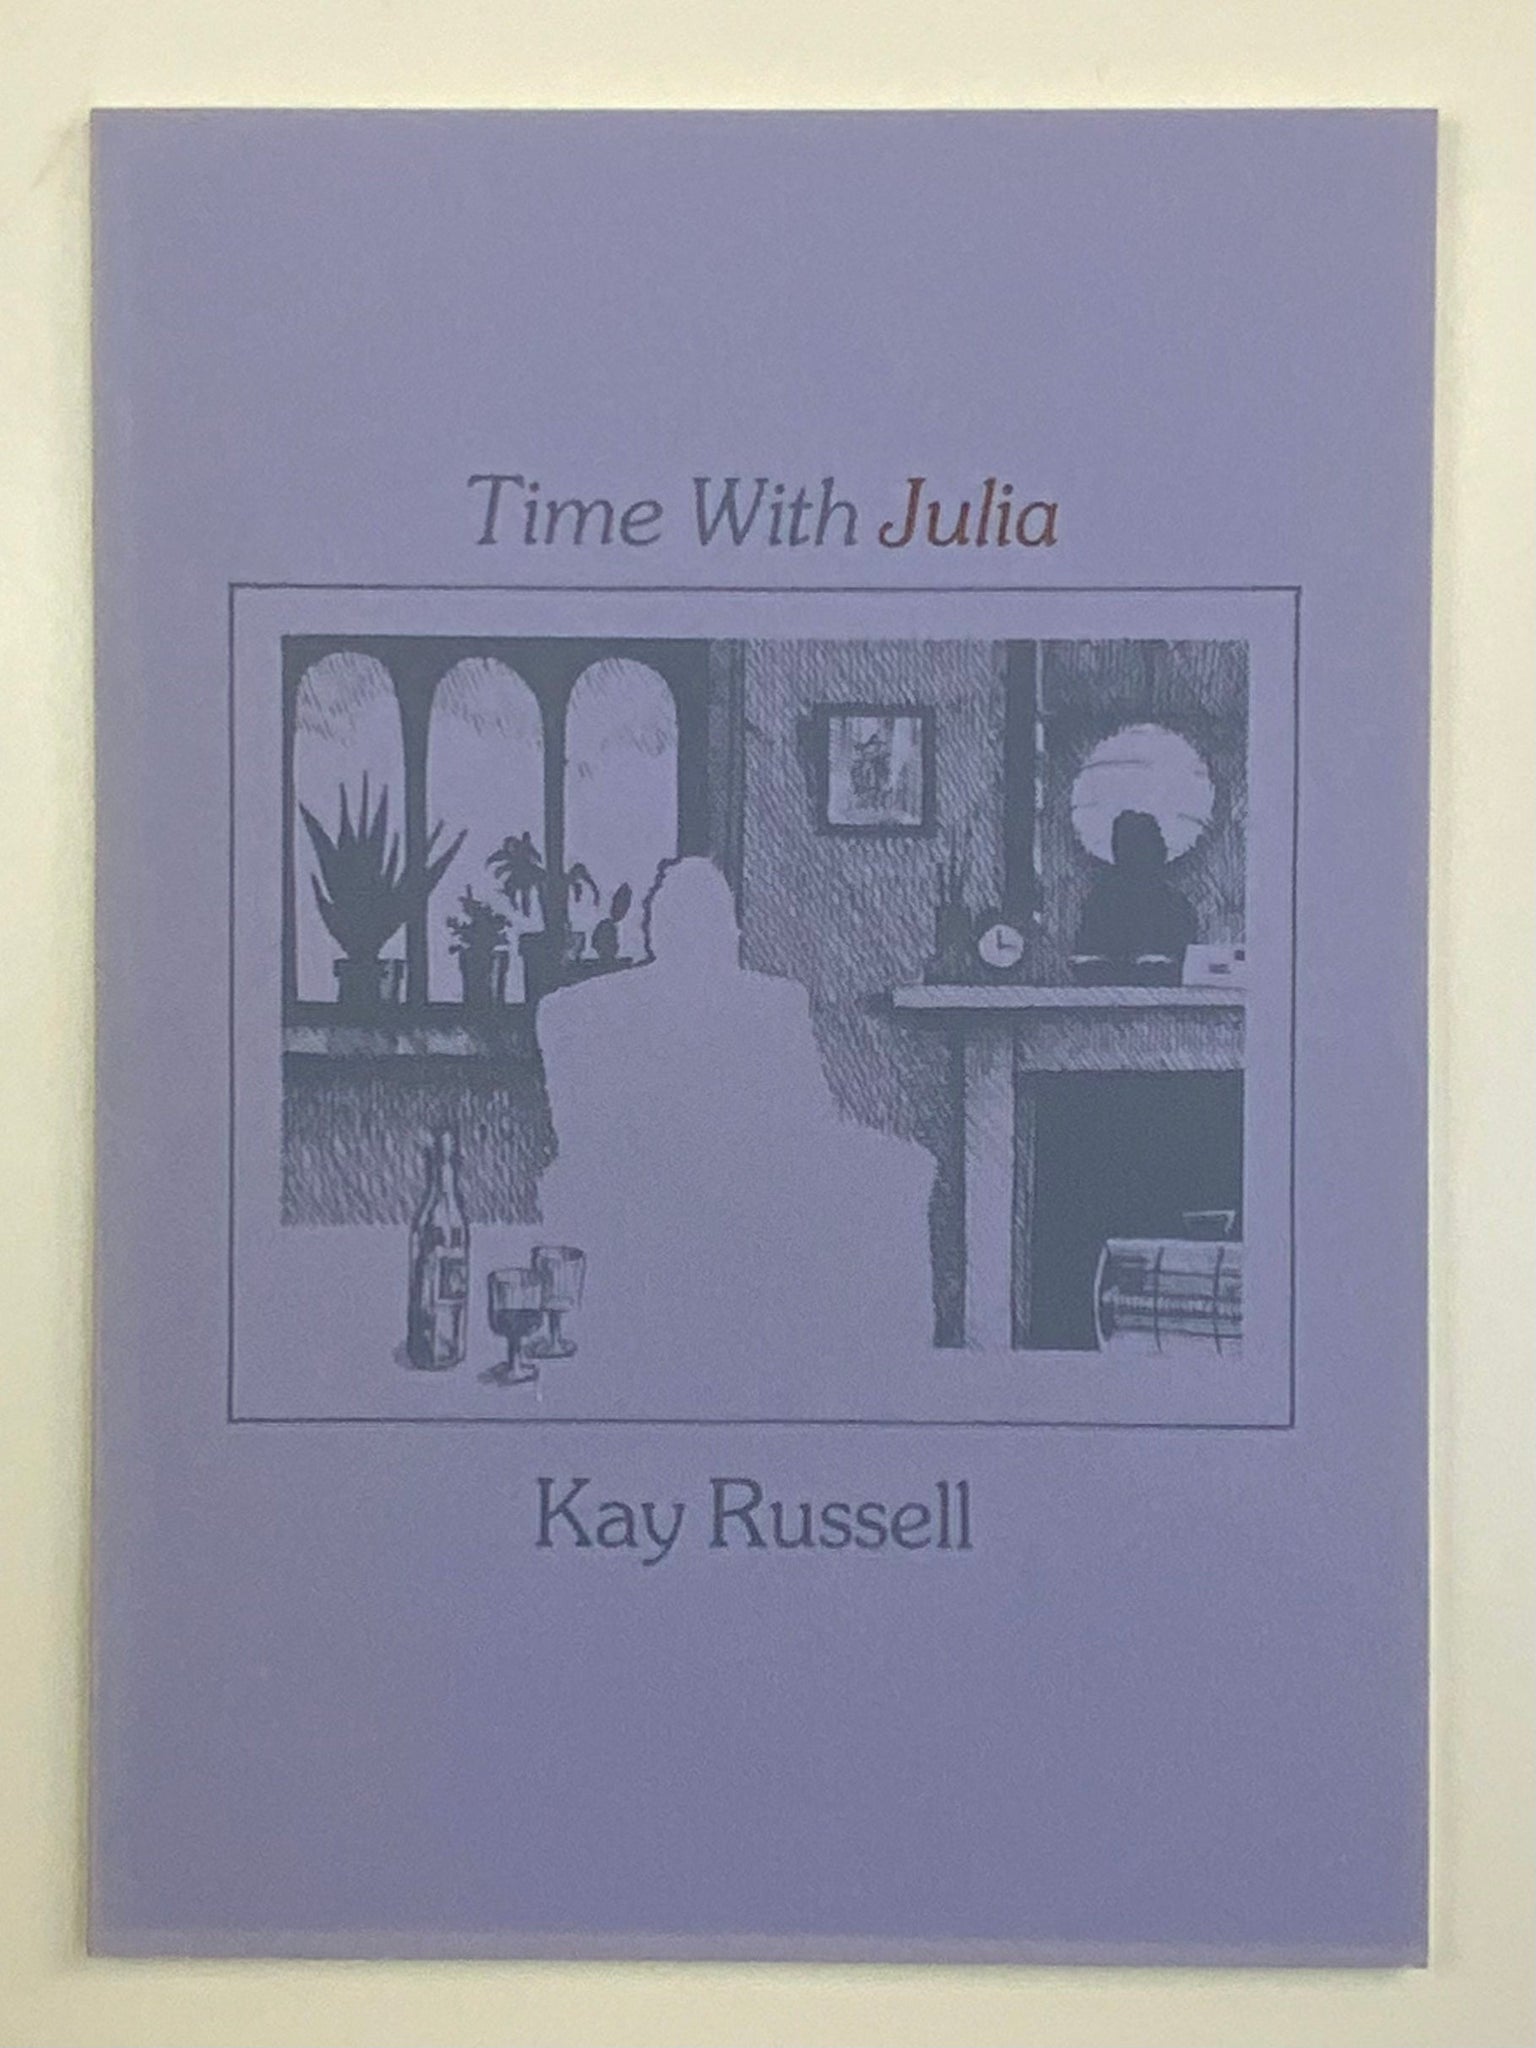 Time with Julia